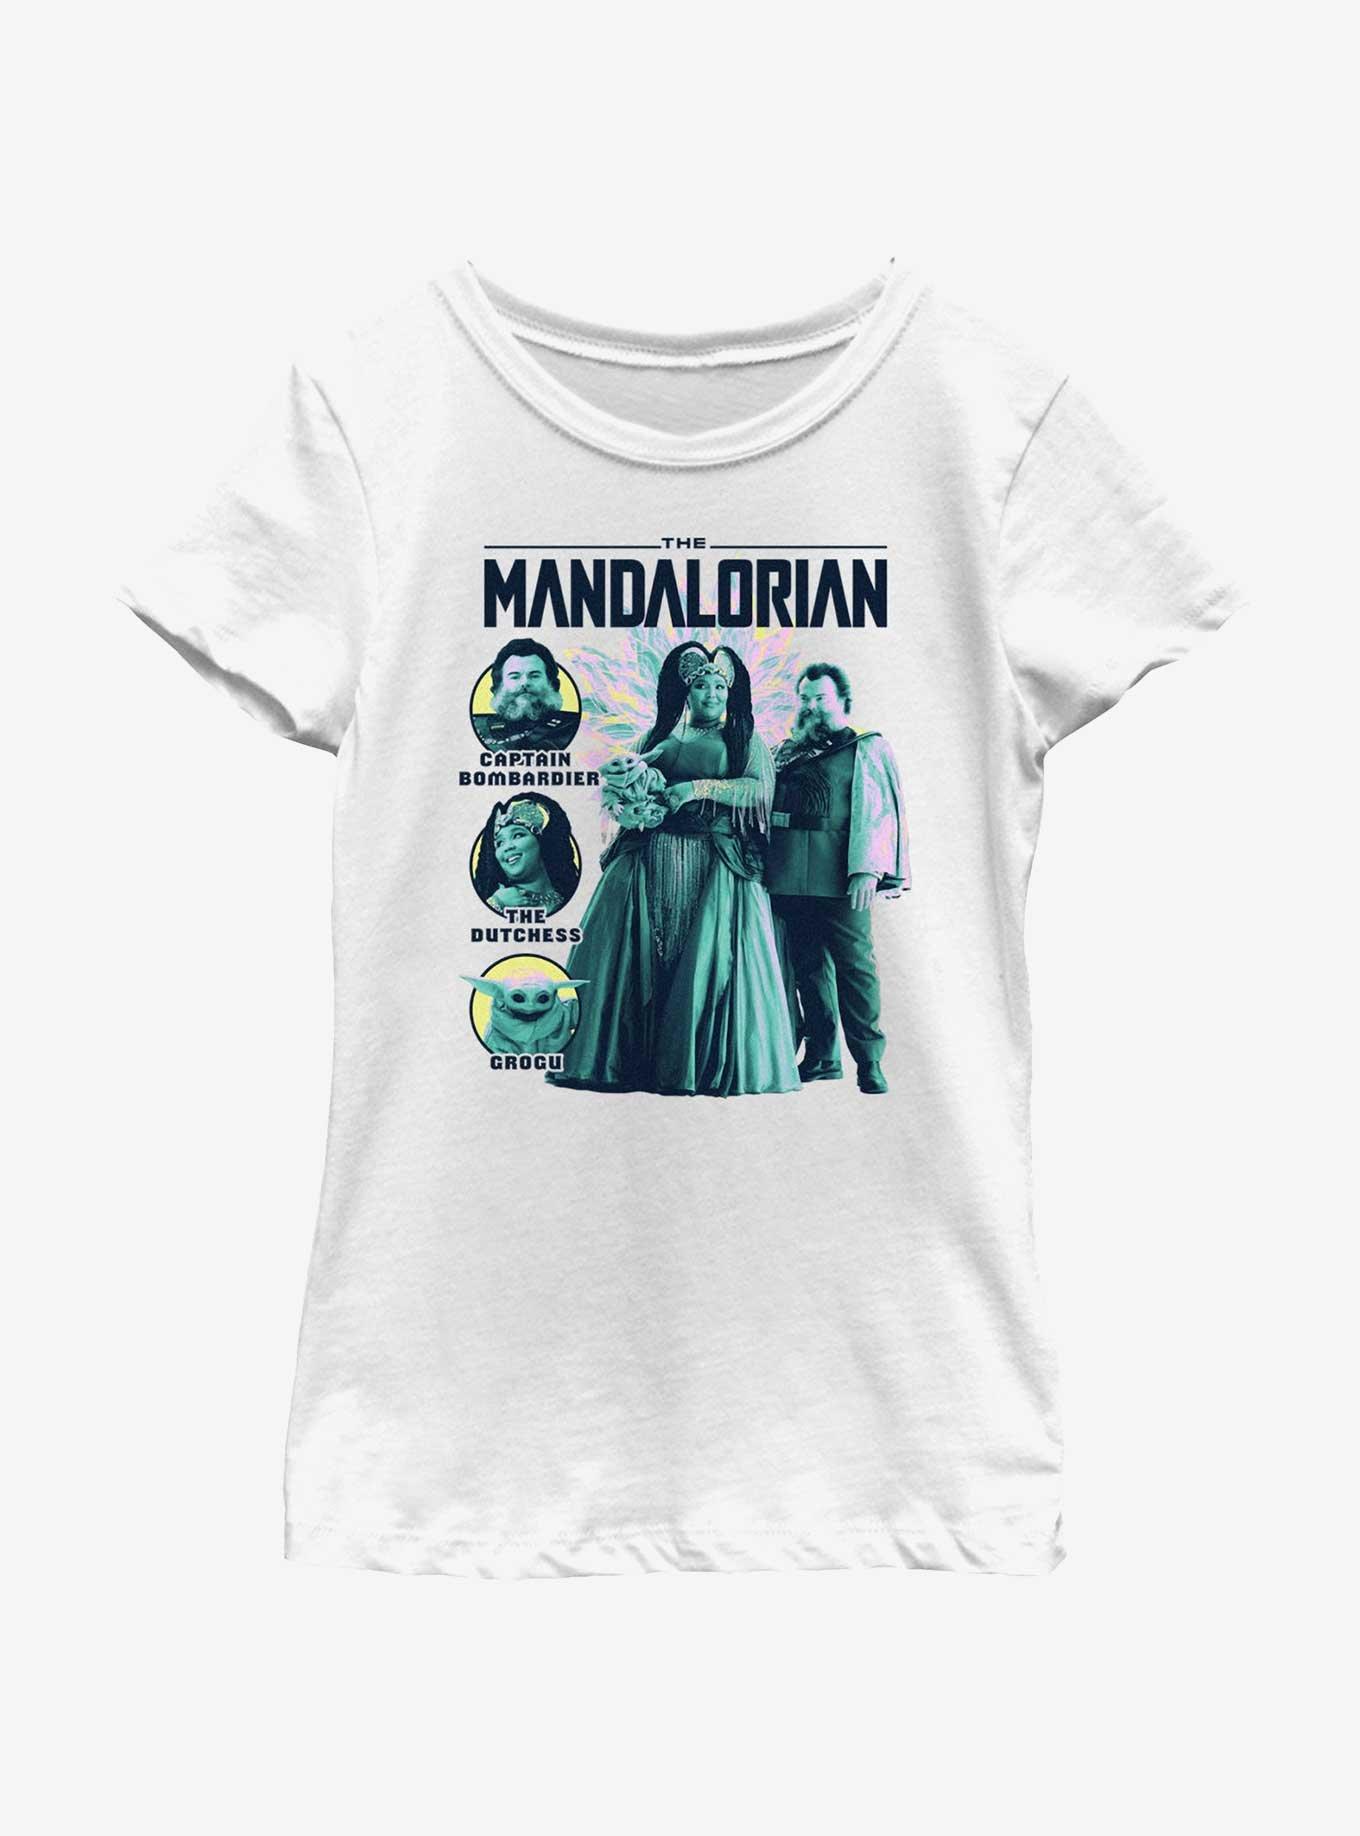 Star Wars The Mandalorian The Captain and The Dutchess Youth Girls T-Shirt, WHITE, hi-res